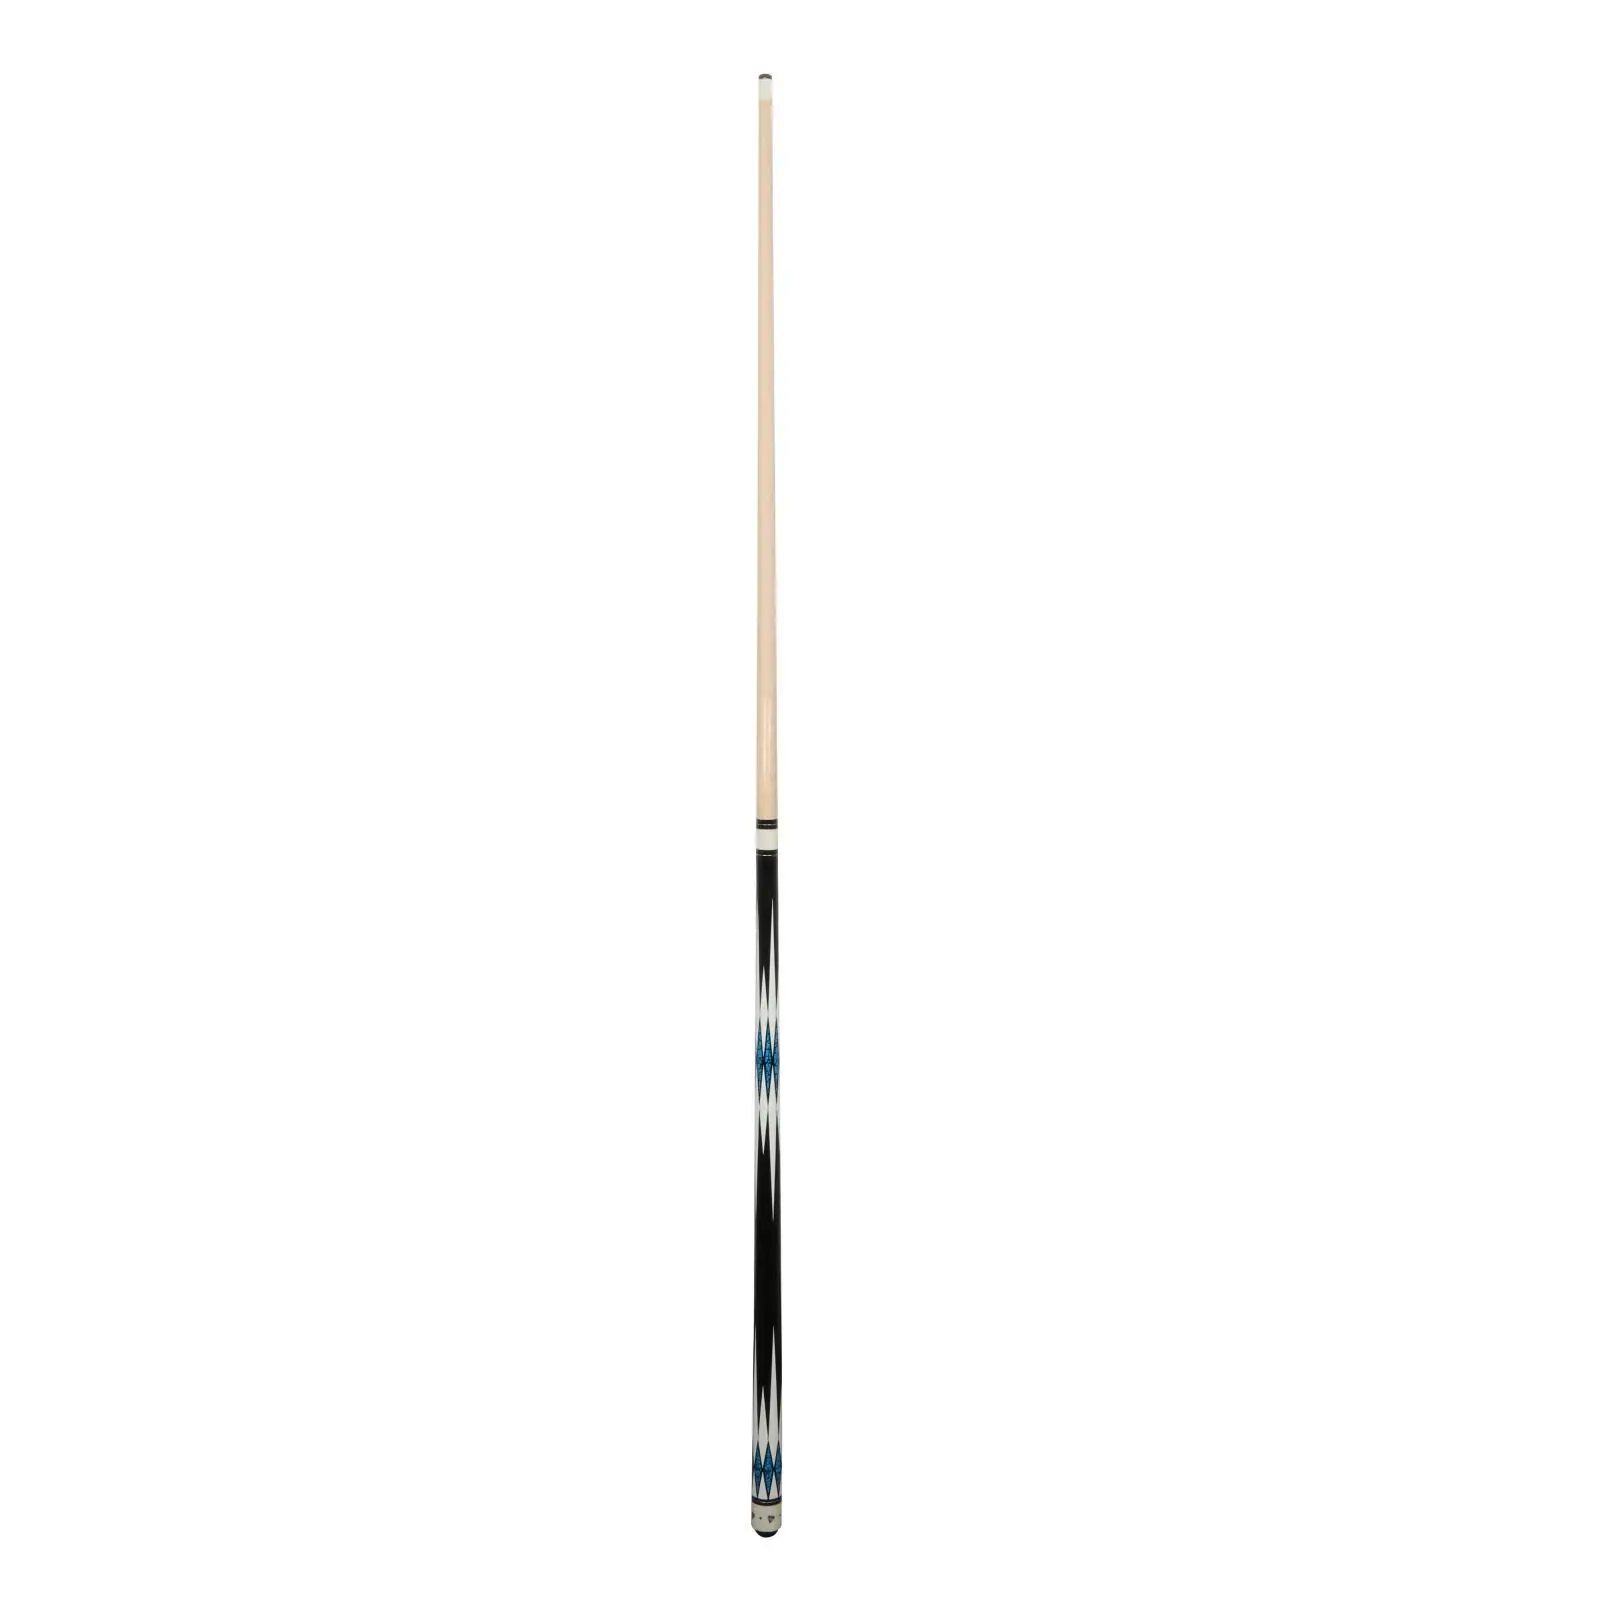 Pool Cue Maple Wood 13mm Tip Snooker Cue for Adult Unisex Billiard Players